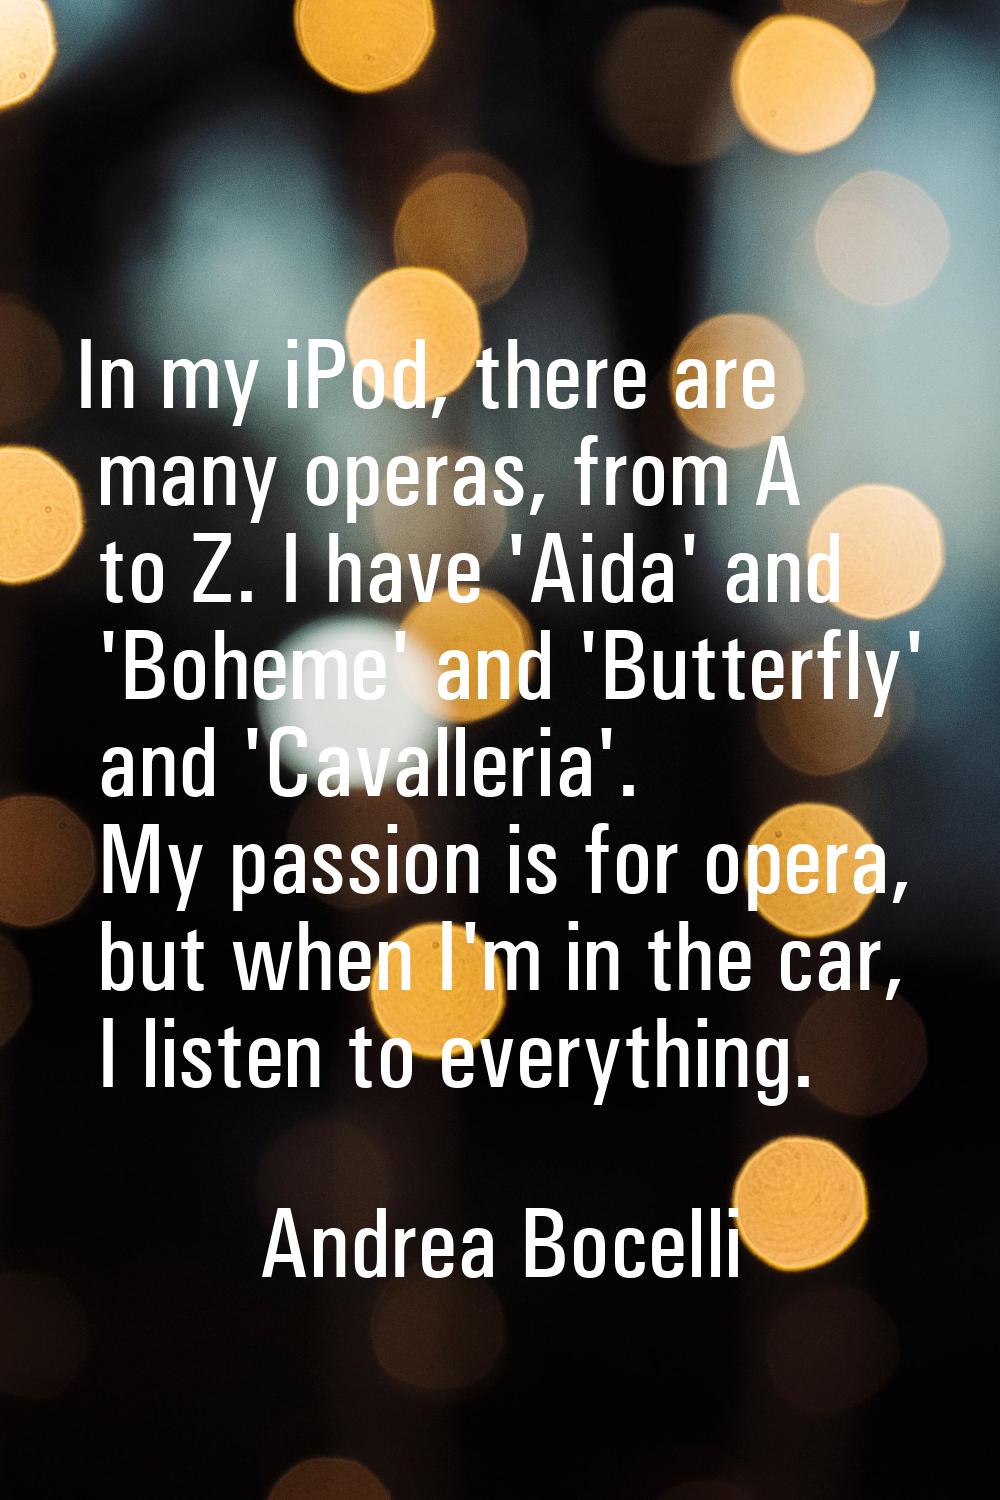 In my iPod, there are many operas, from A to Z. I have 'Aida' and 'Boheme' and 'Butterfly' and 'Cav